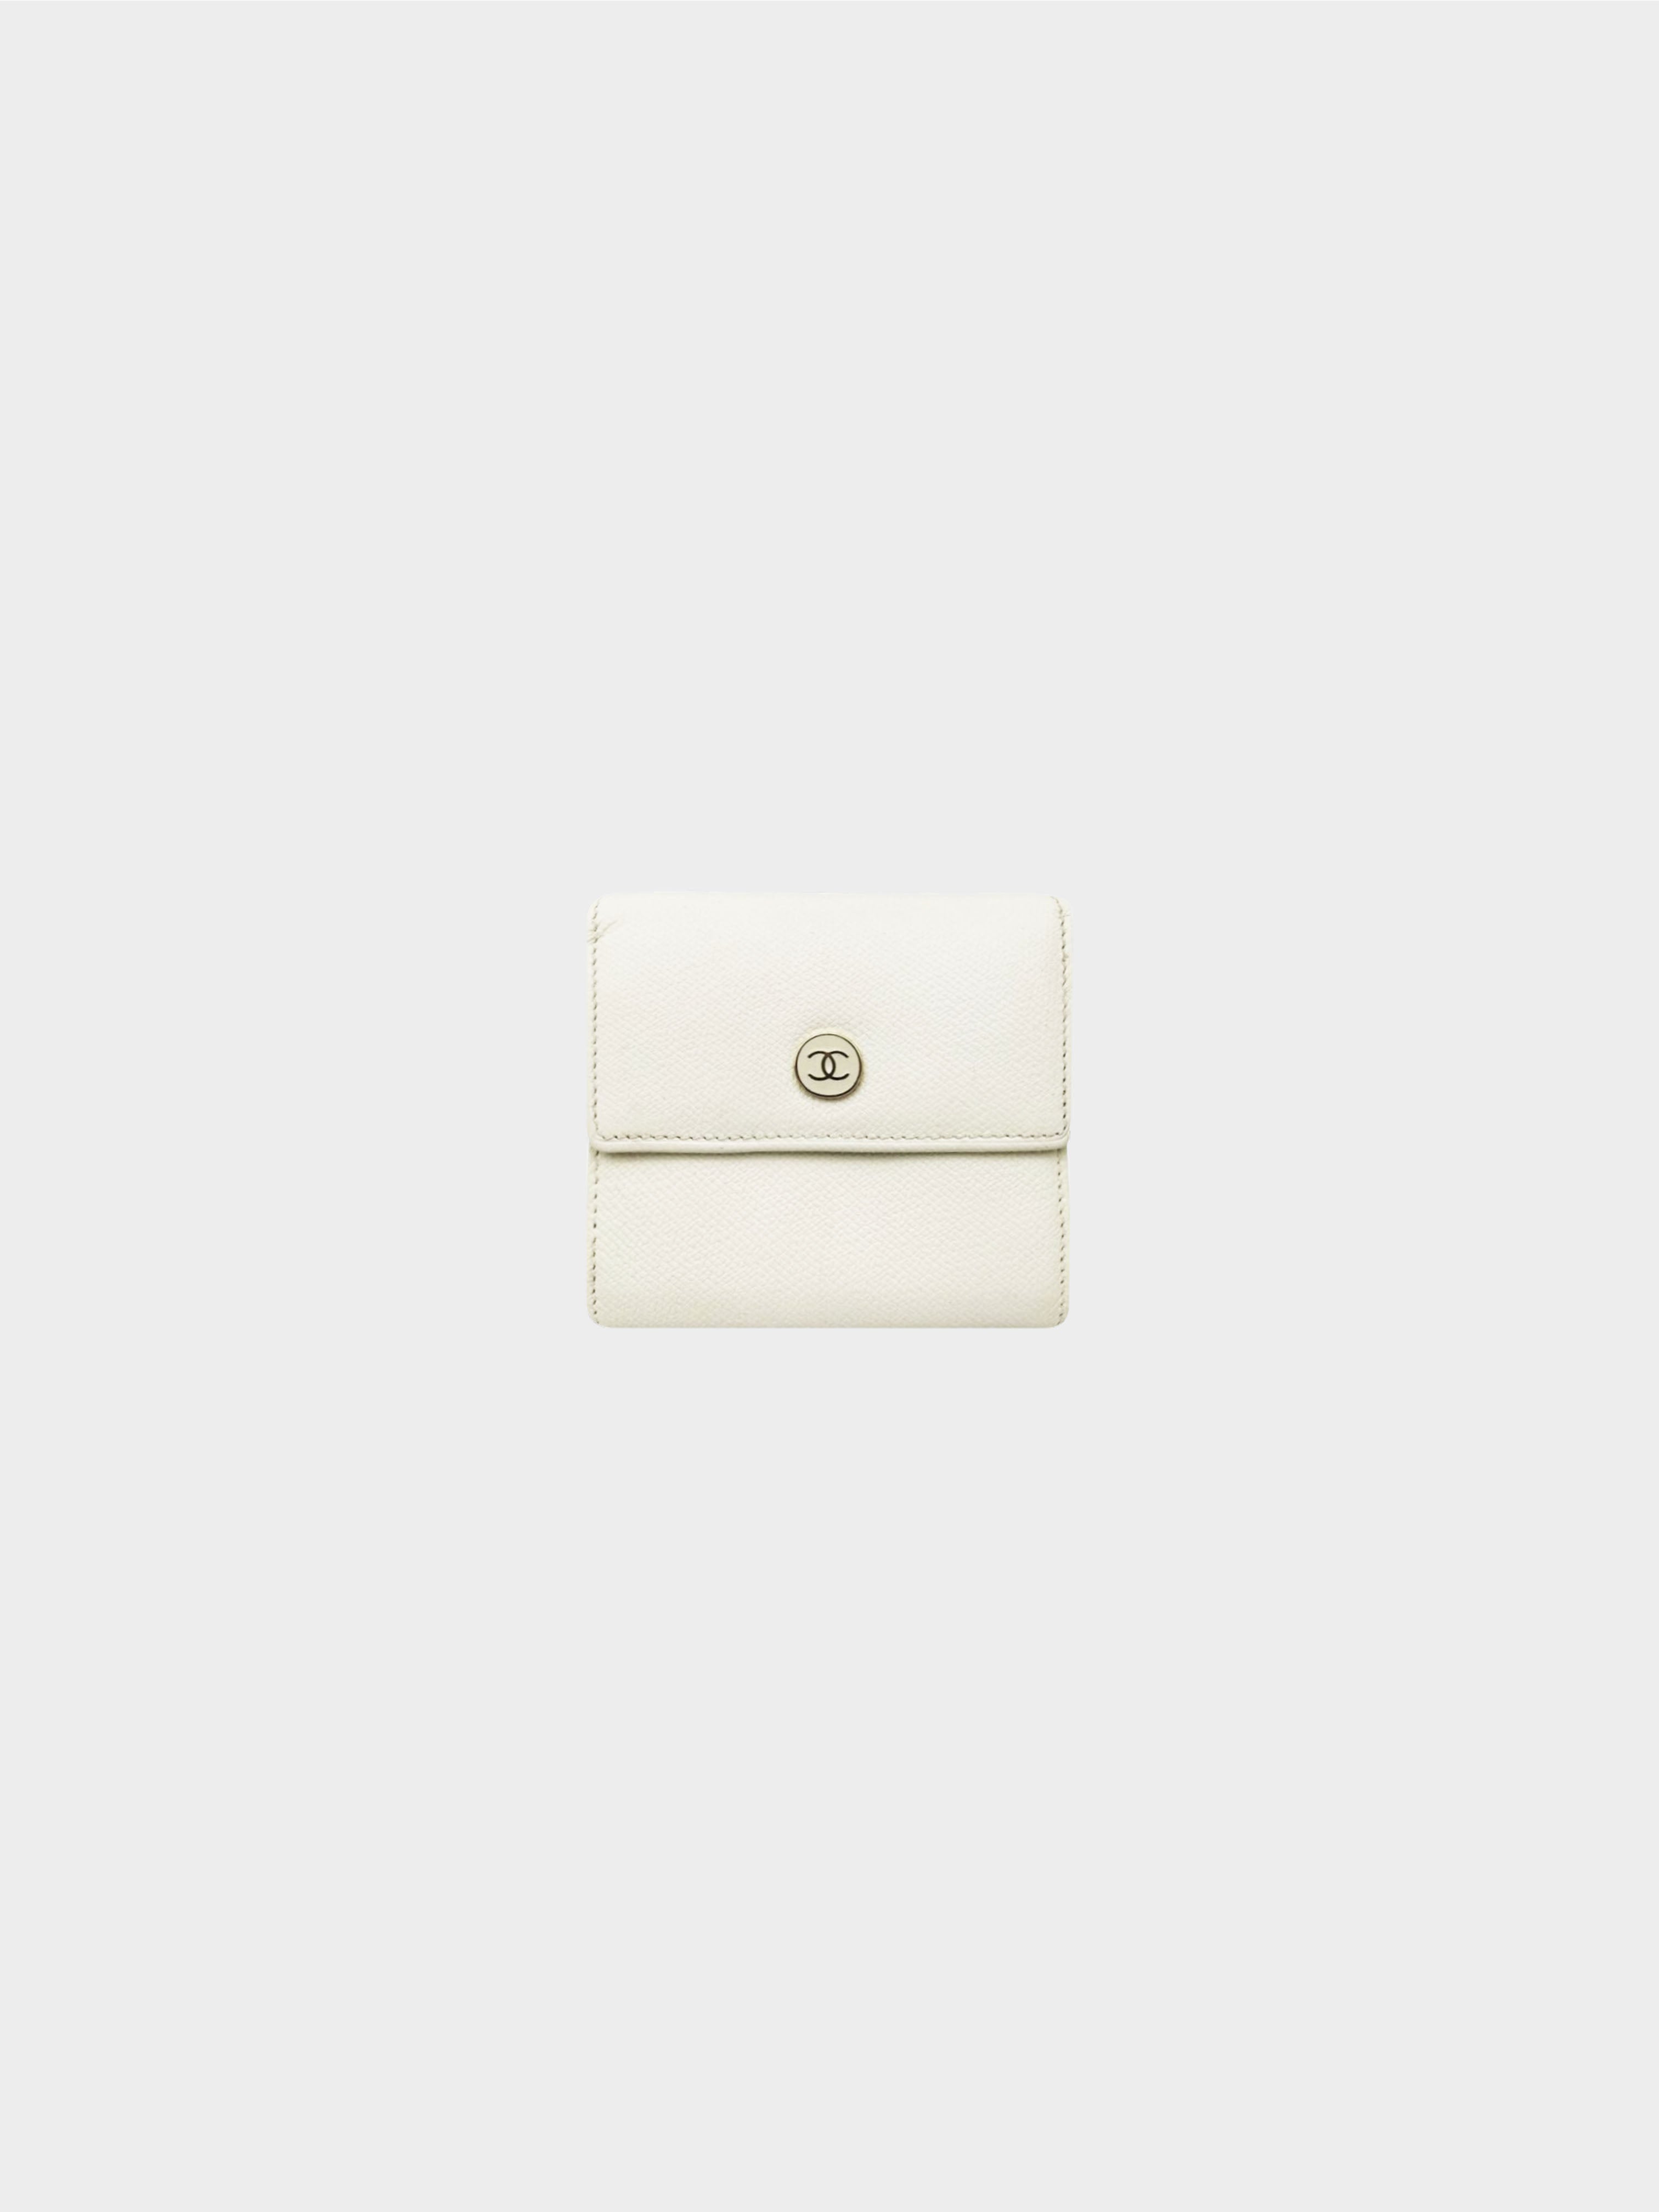 Chanel 2004-2005 Off-White Caviar Wallet